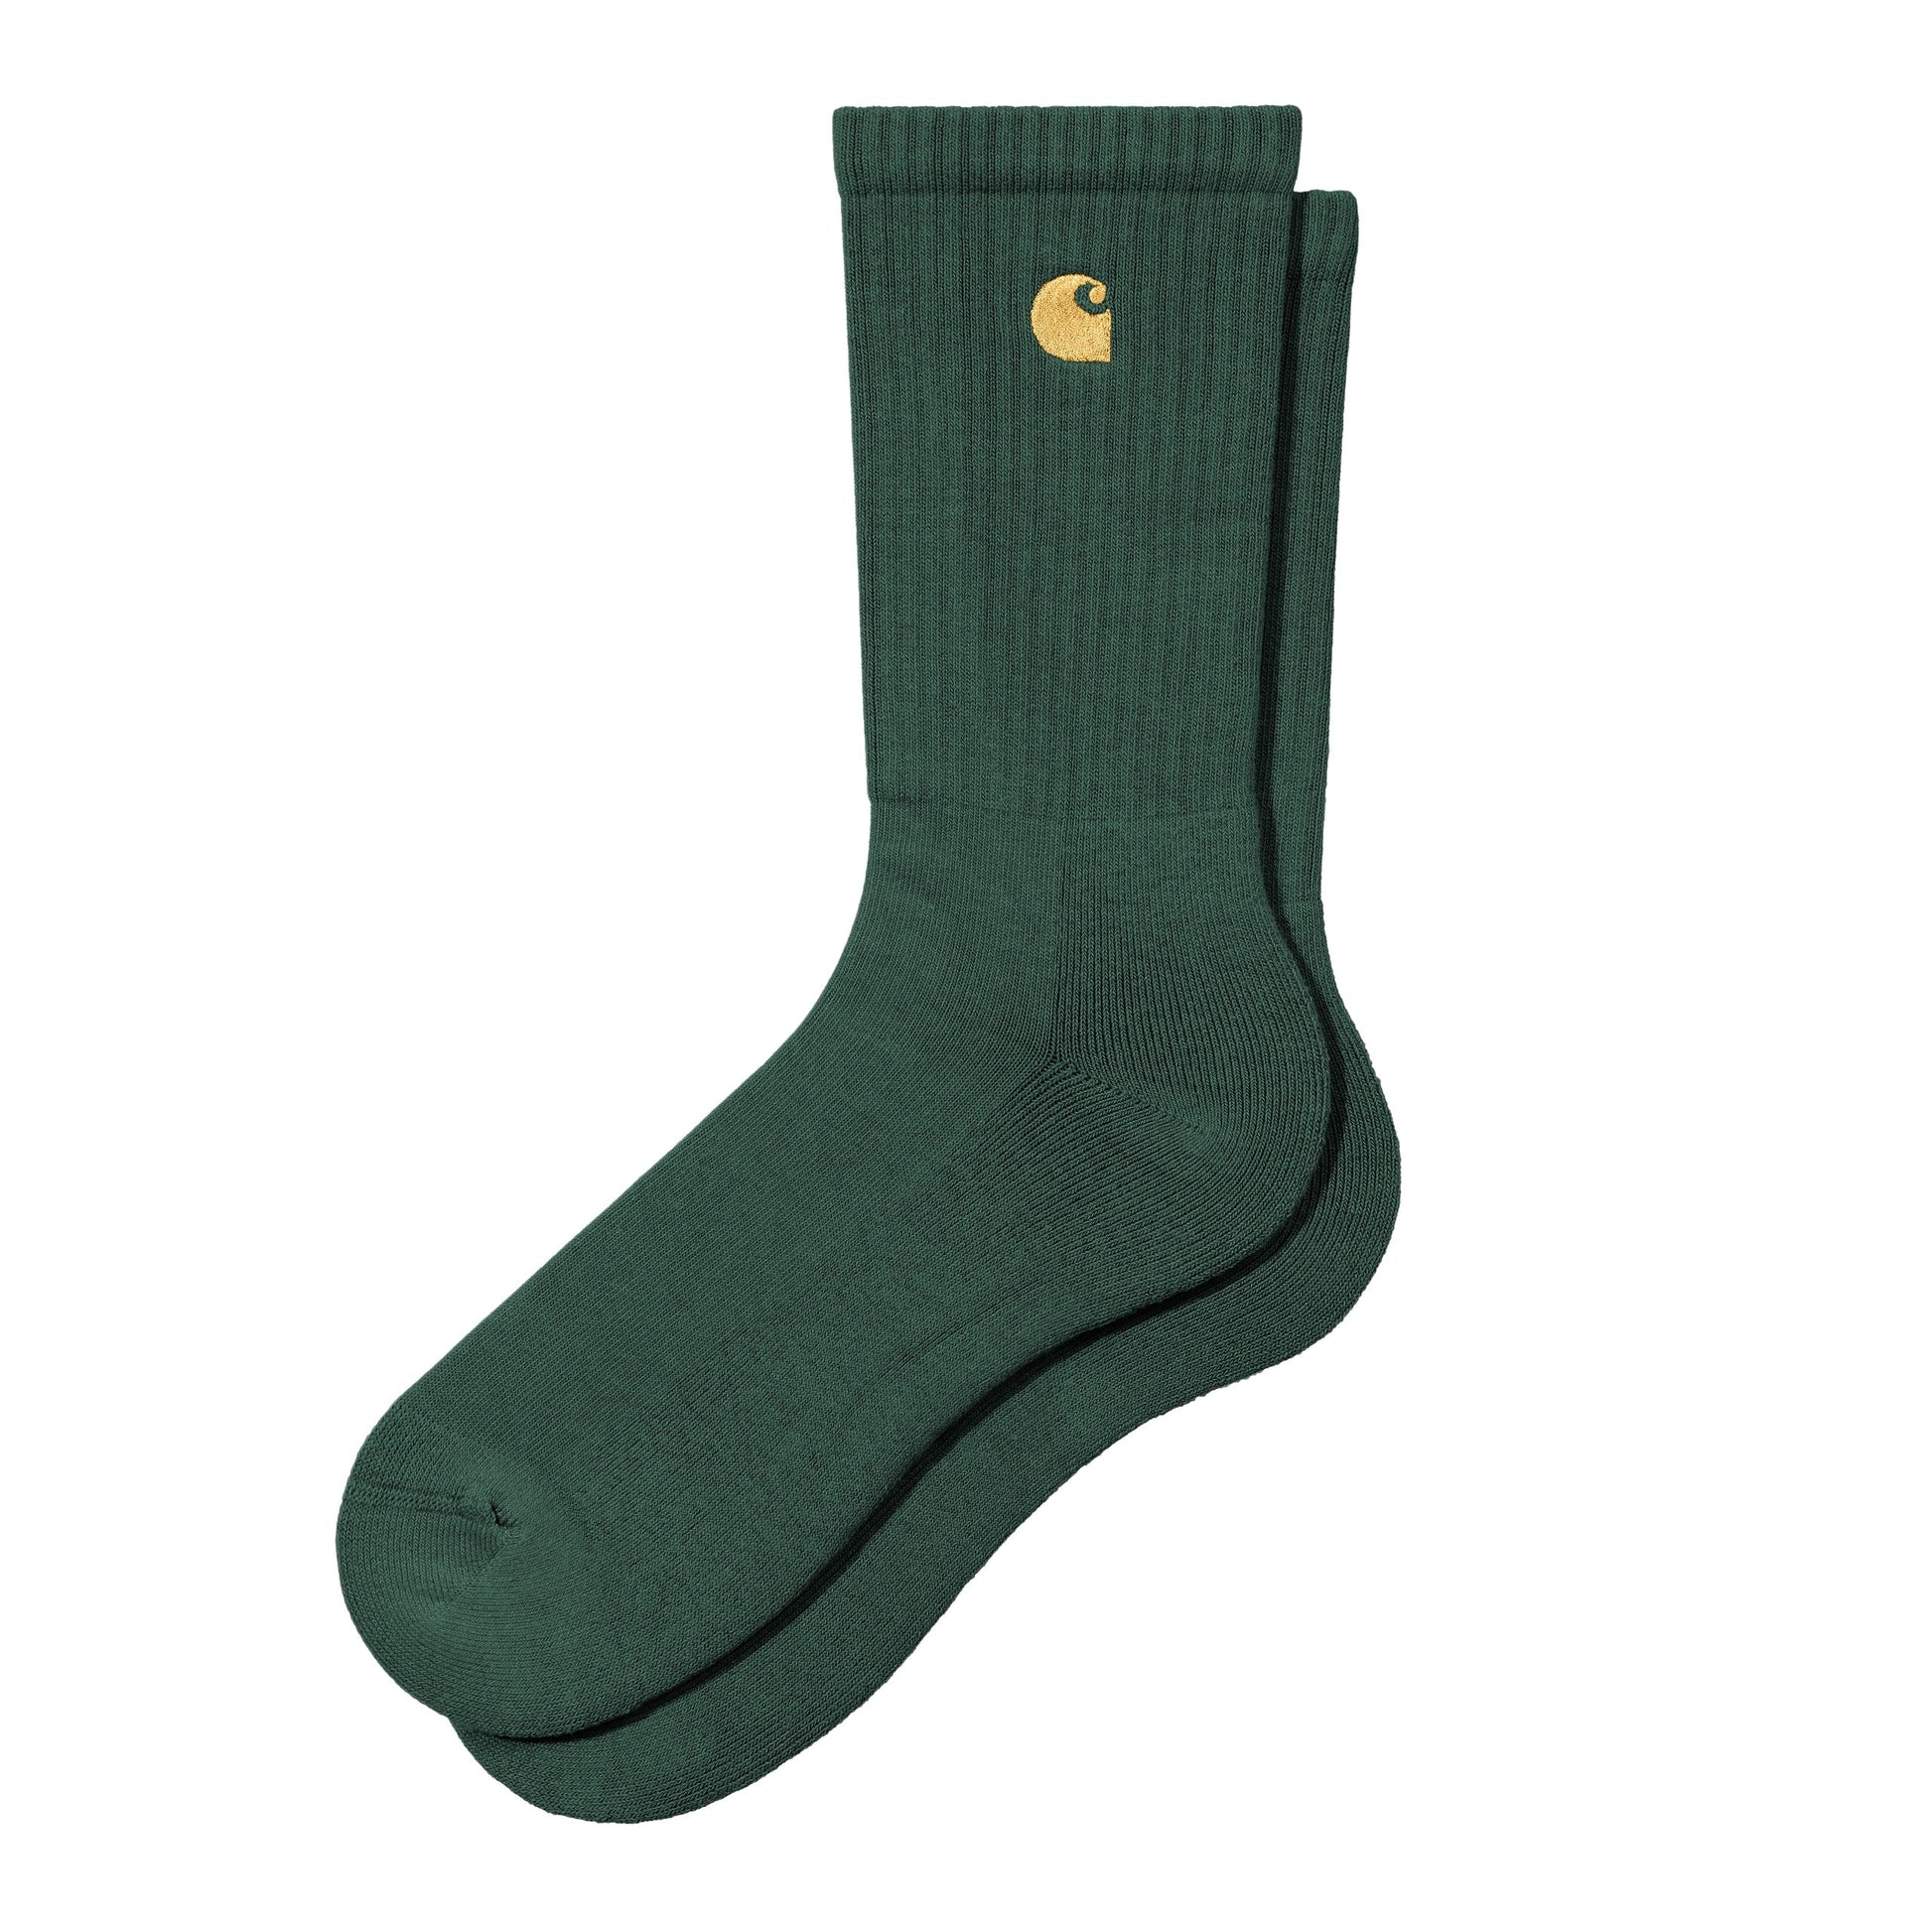 Carhartt WIP Chase Socks discovery-green-gold